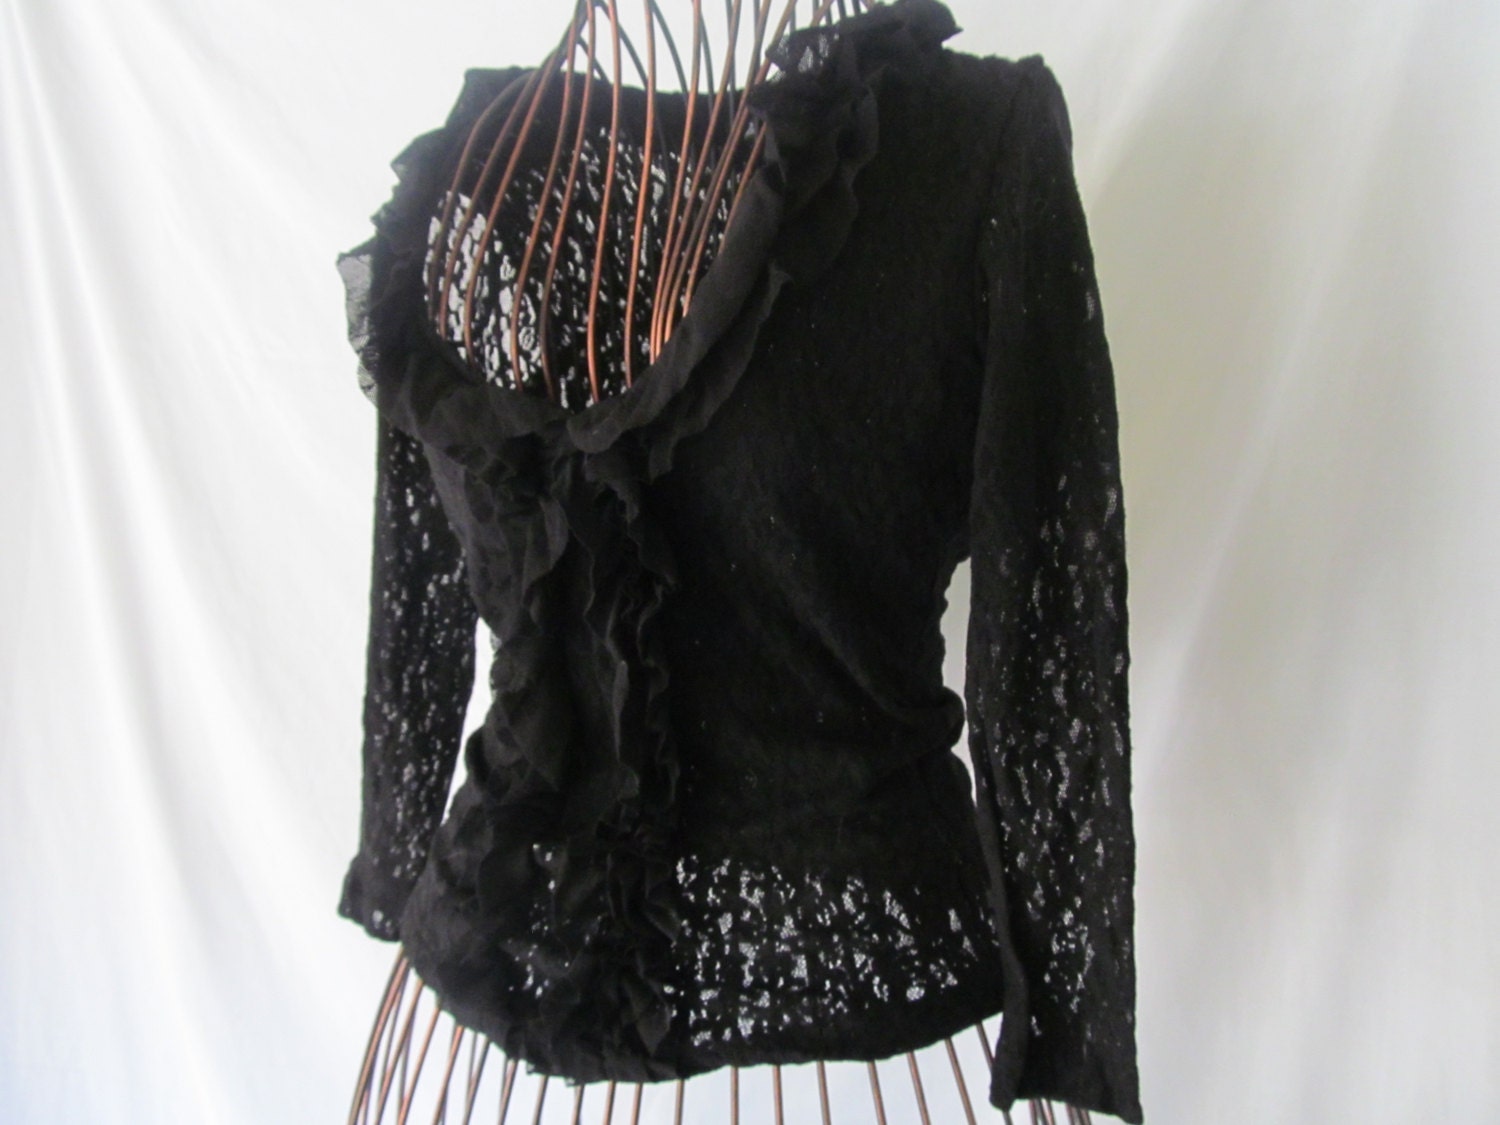 Sexy Low Cut Black Lace Blouse Sheer Lace and by ReVintageBoutique